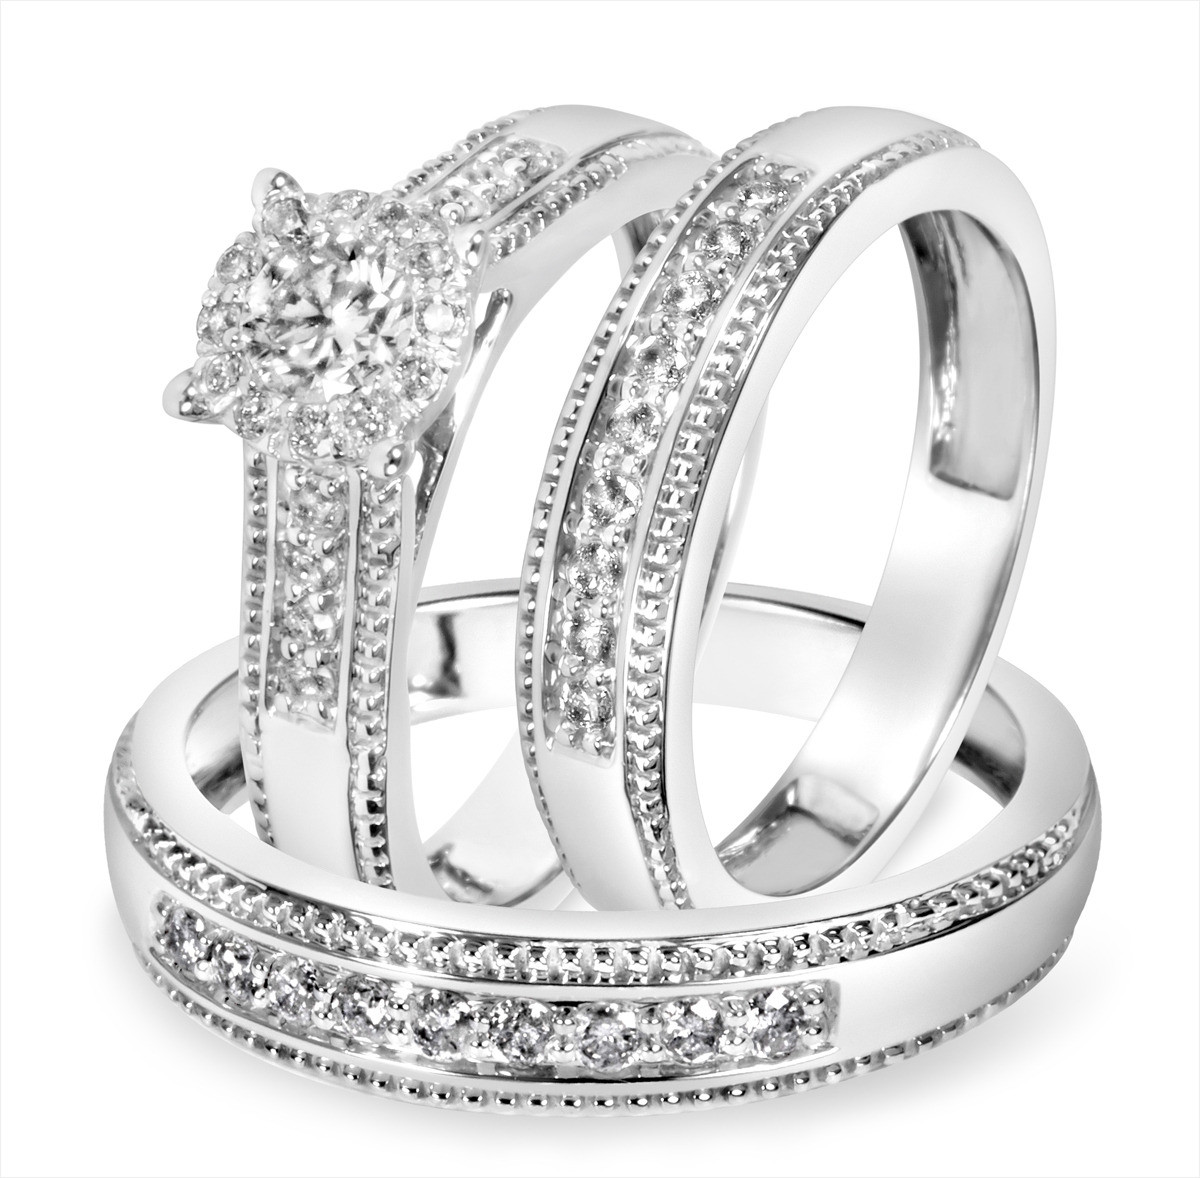 Ceramic Wedding Bands Pros And Cons
 47 Glamorous Trio Wedding Ring Sets Zales Ce1771 The Jewelry